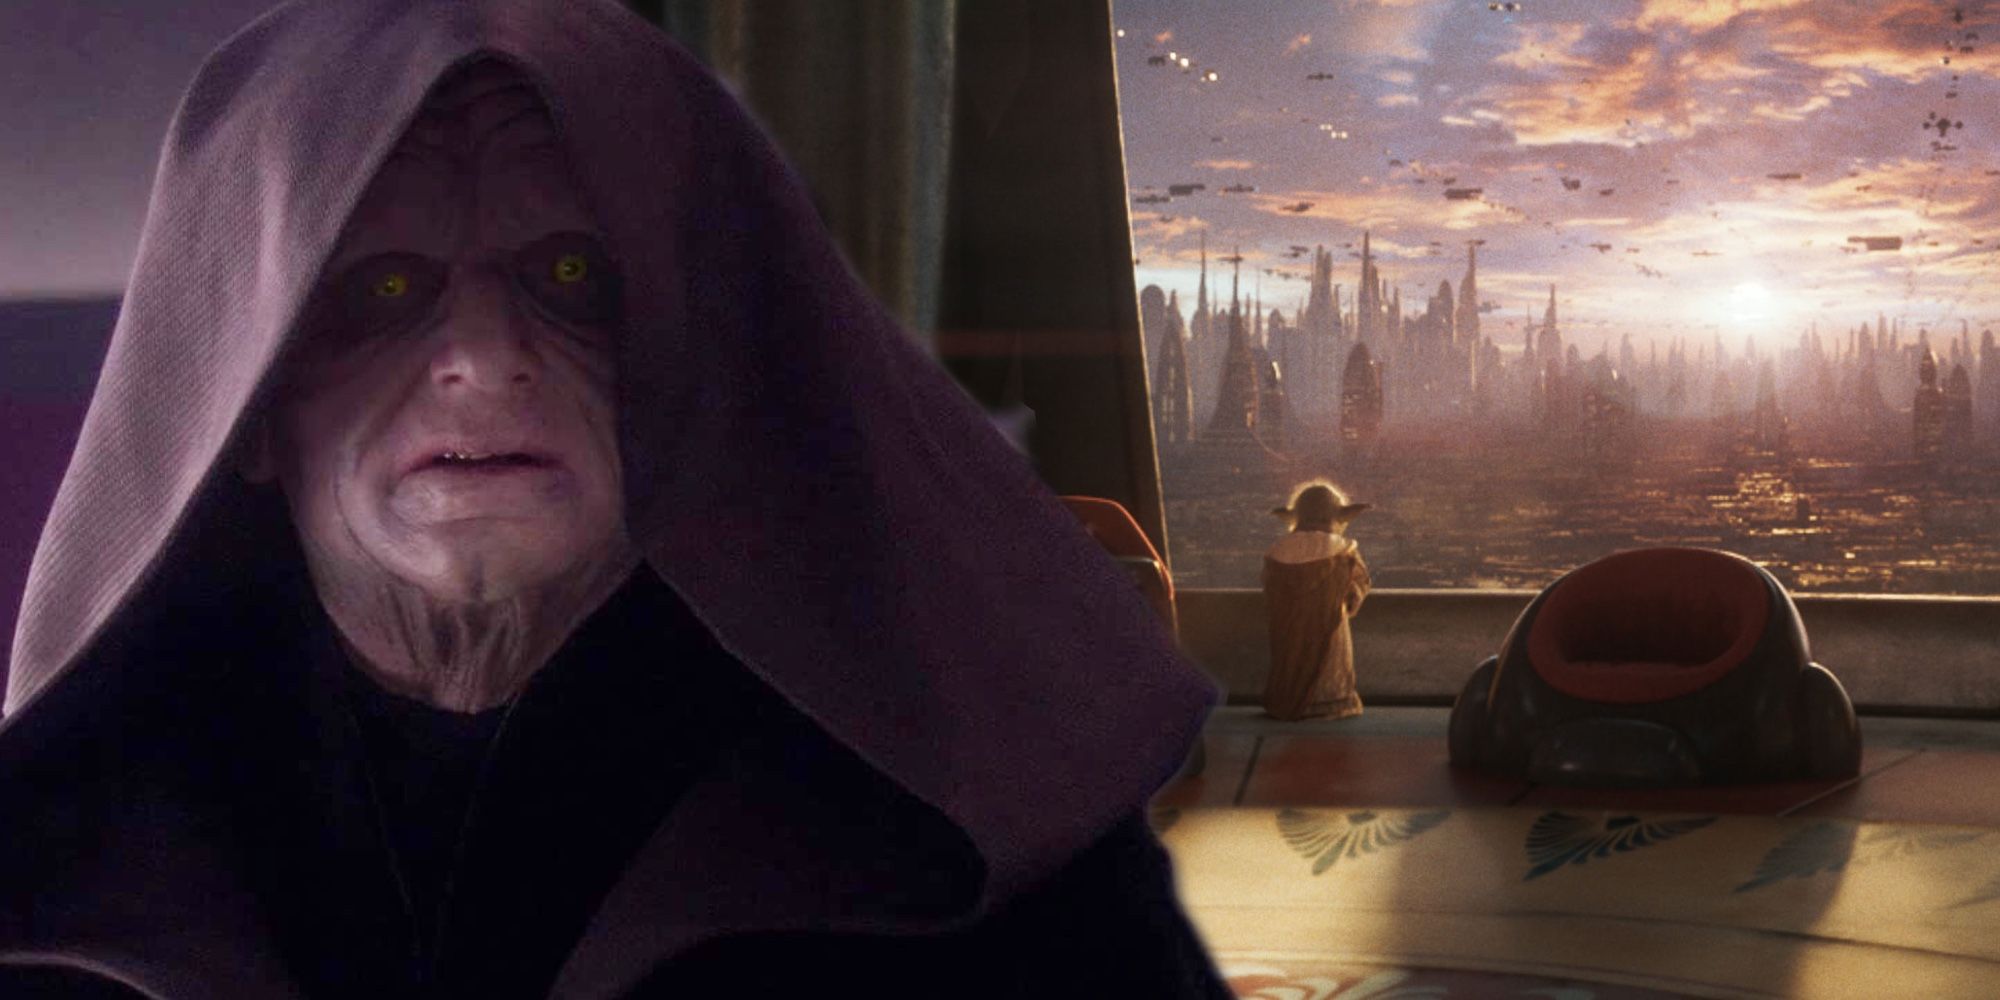 star wwars one palpatine quoter pefectly explains the fall of the jedi order your arrogance blinds you master yoda